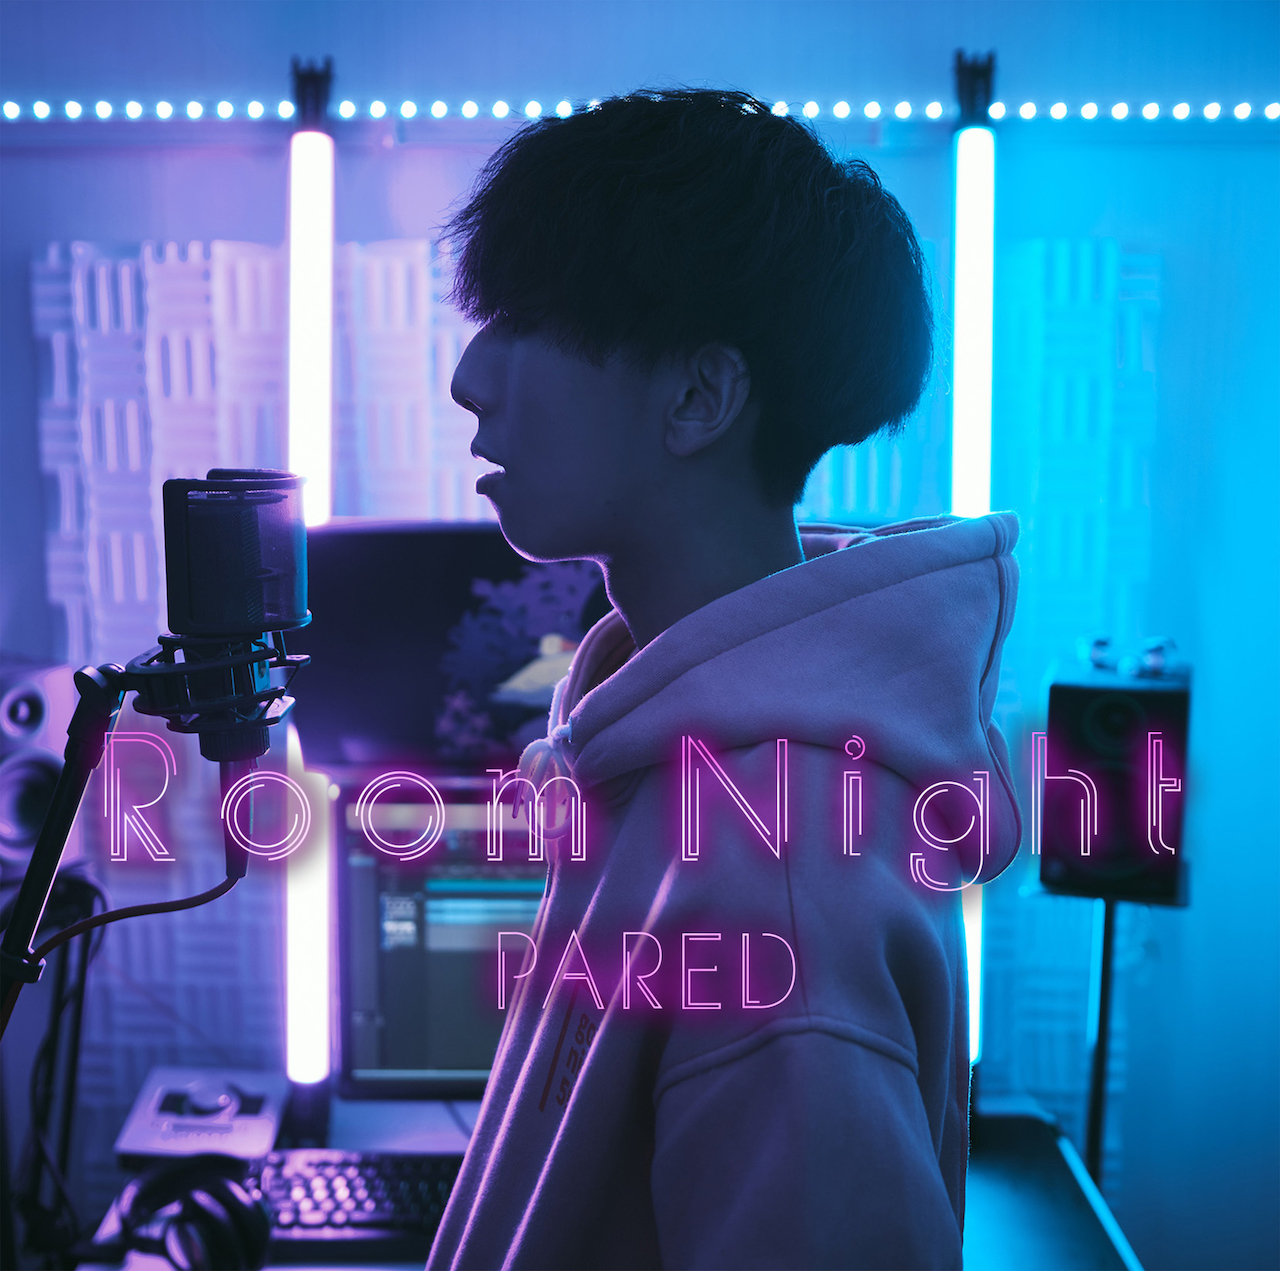 PARED “Room Night” Limited Edition（CD+DVD）Release on March16th,2022